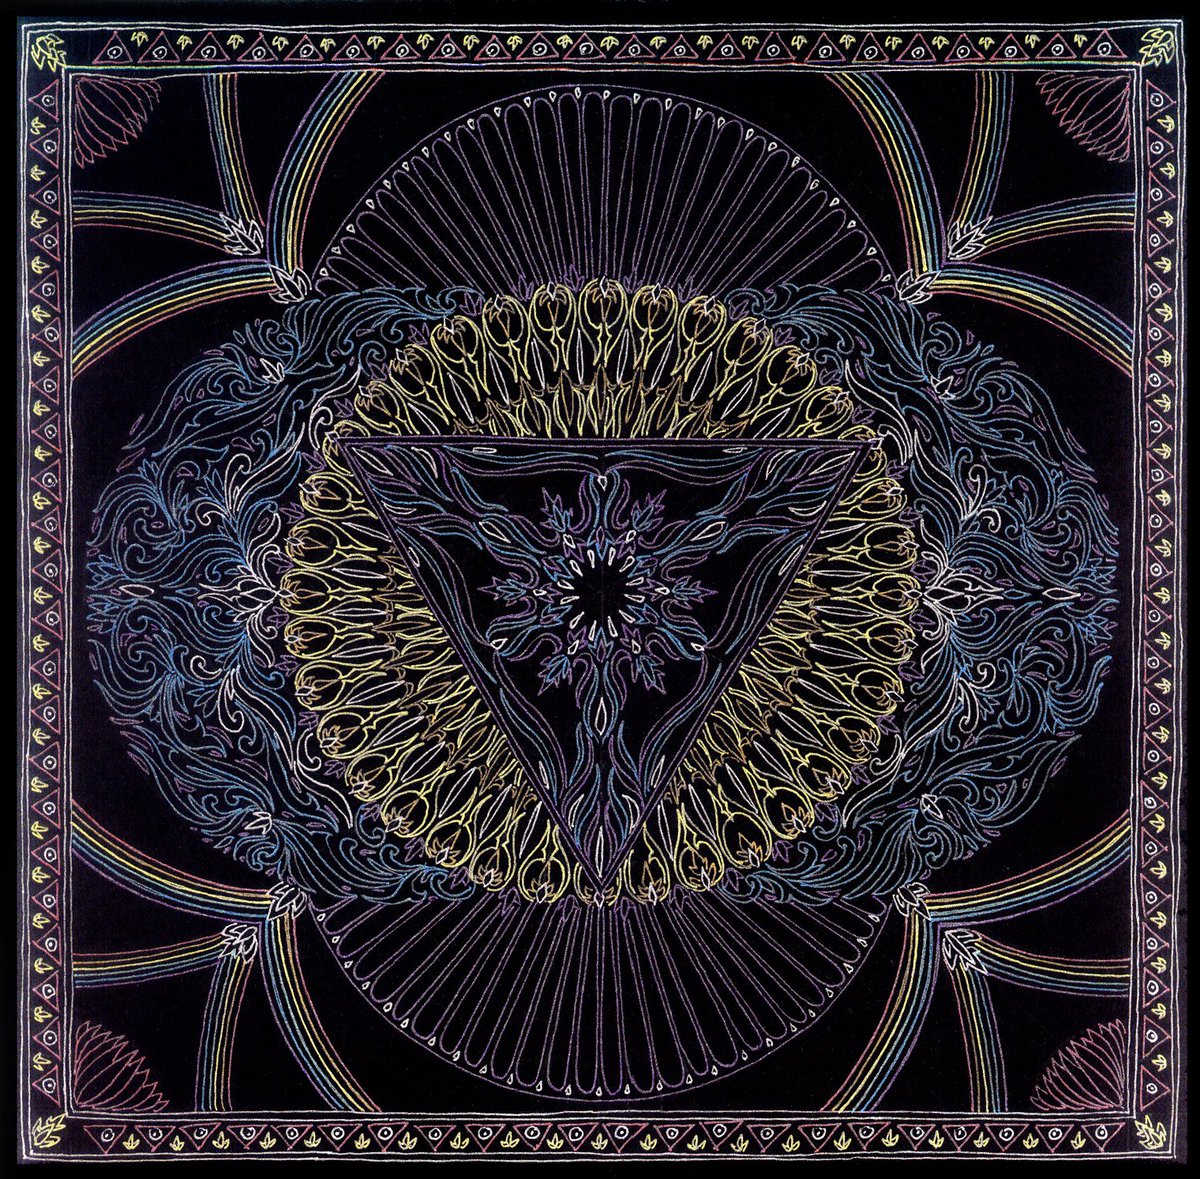 Chakra Ajna Mandala

“Om . . .
Resonating to the worlds
Pulsing beyond sight

To see what truly is
To view what is not
To peer into what shall
To gaze into what was

And awaken
To what is . . .”

2012
Metallic Gel Pen on Illustration Board

#visionaryart #mandala #mandalaart